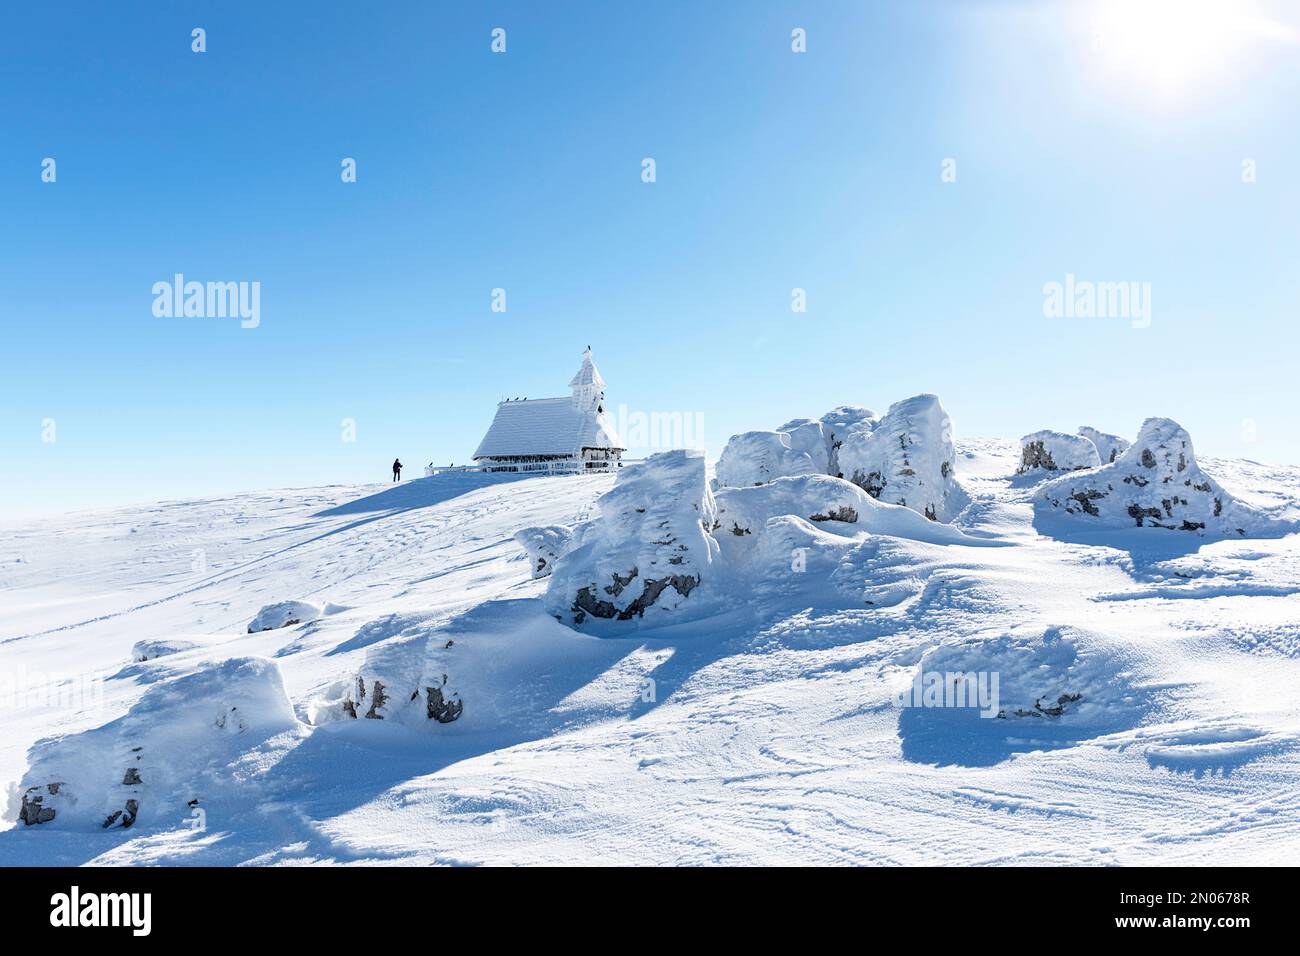 Hiker, tourist stopping at the spectacular frozen Chapel of Mary of the Snows on Velika planina Alpine pasture, winter fairytale landscape, Slovenia Stock Photo